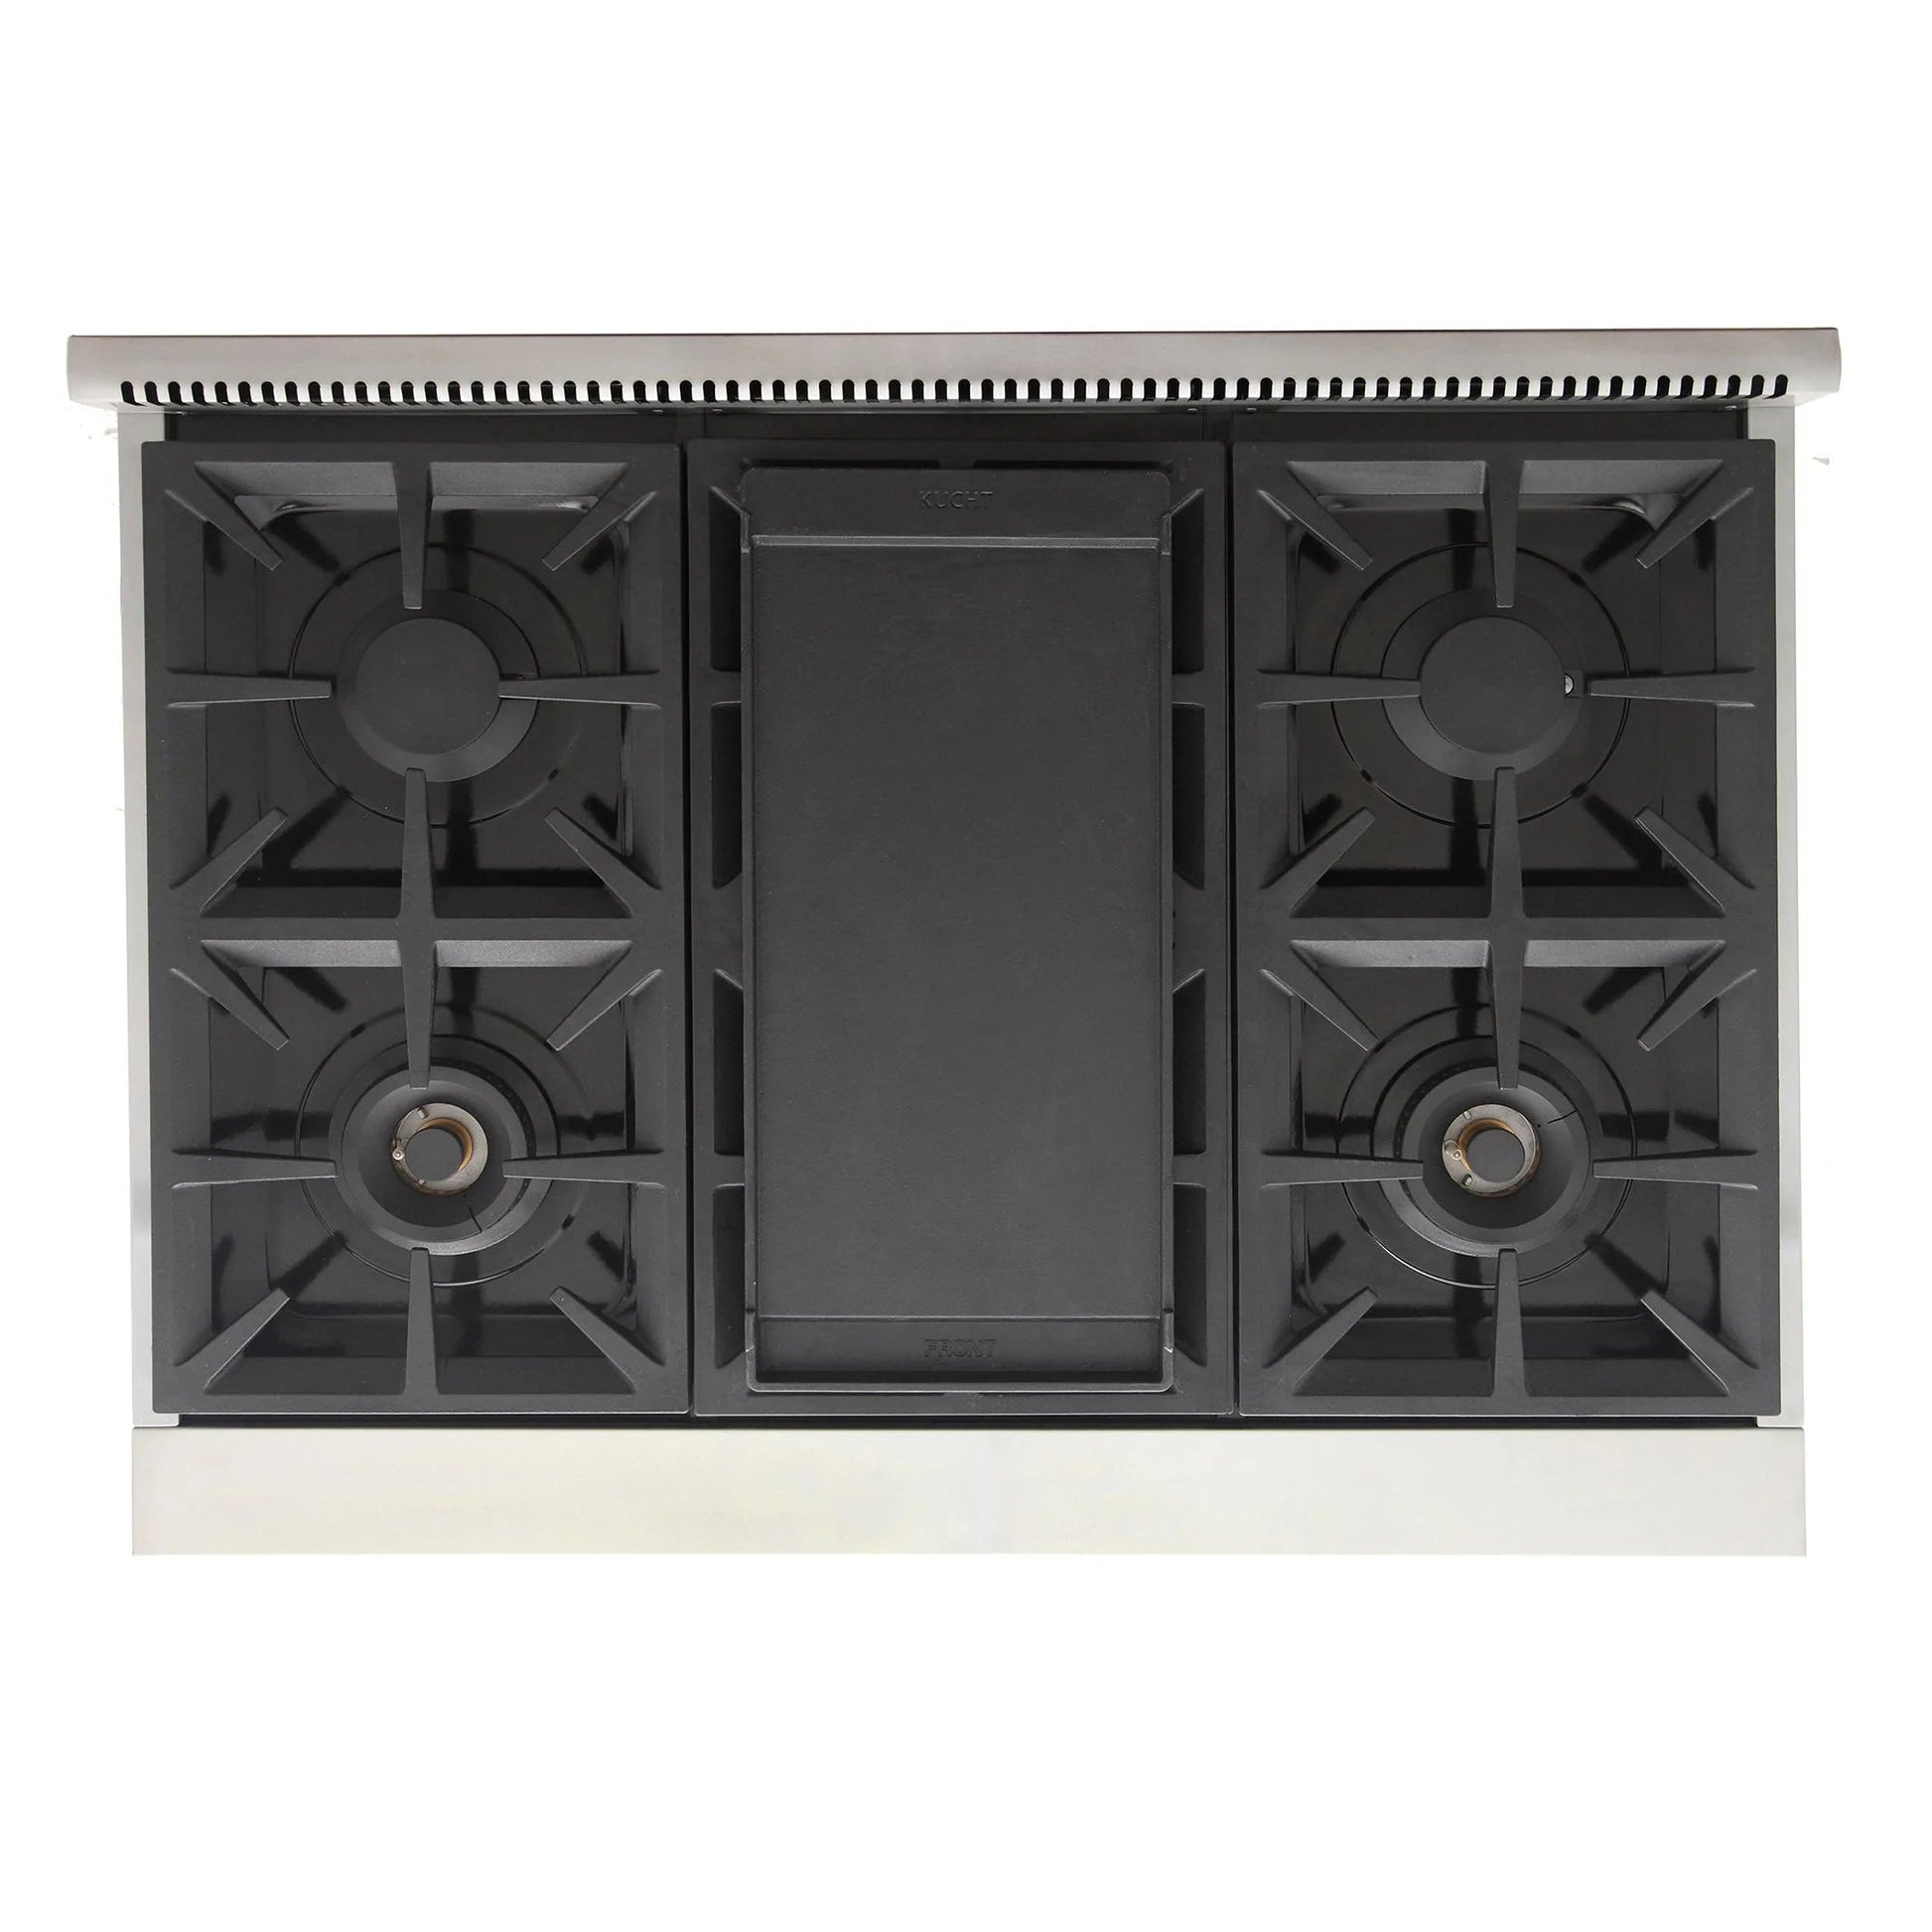 Kucht KFX Series 36" Freestanding Natural Gas Range With 6 Burners and Tuxedo Black Knobs